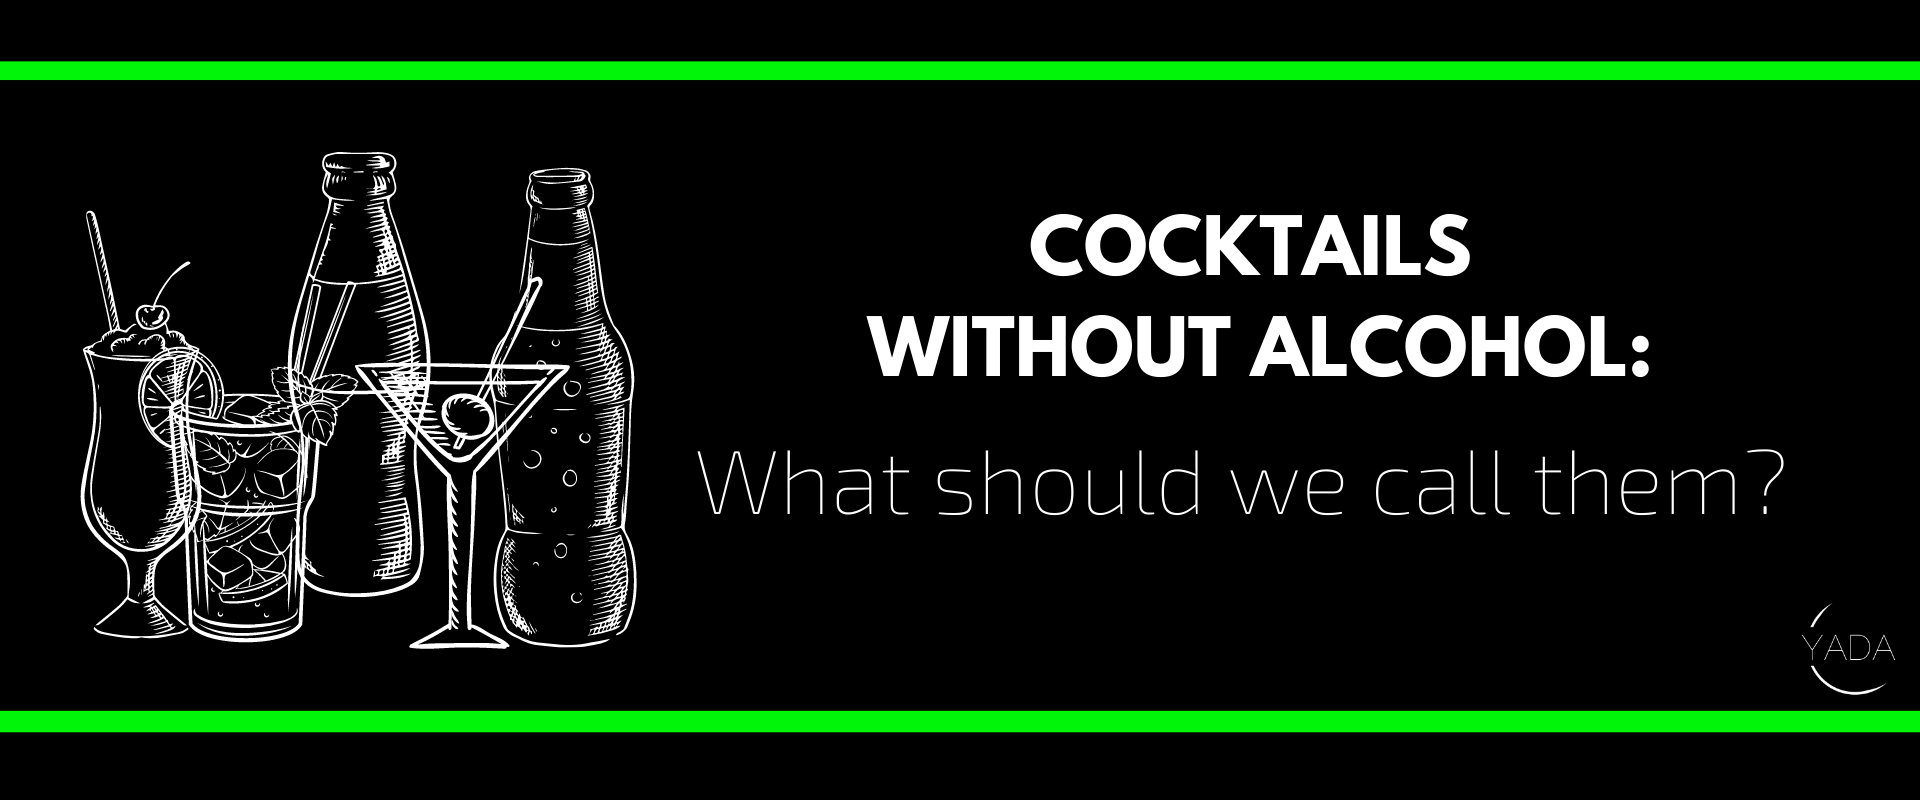 Cocktails without alcohol